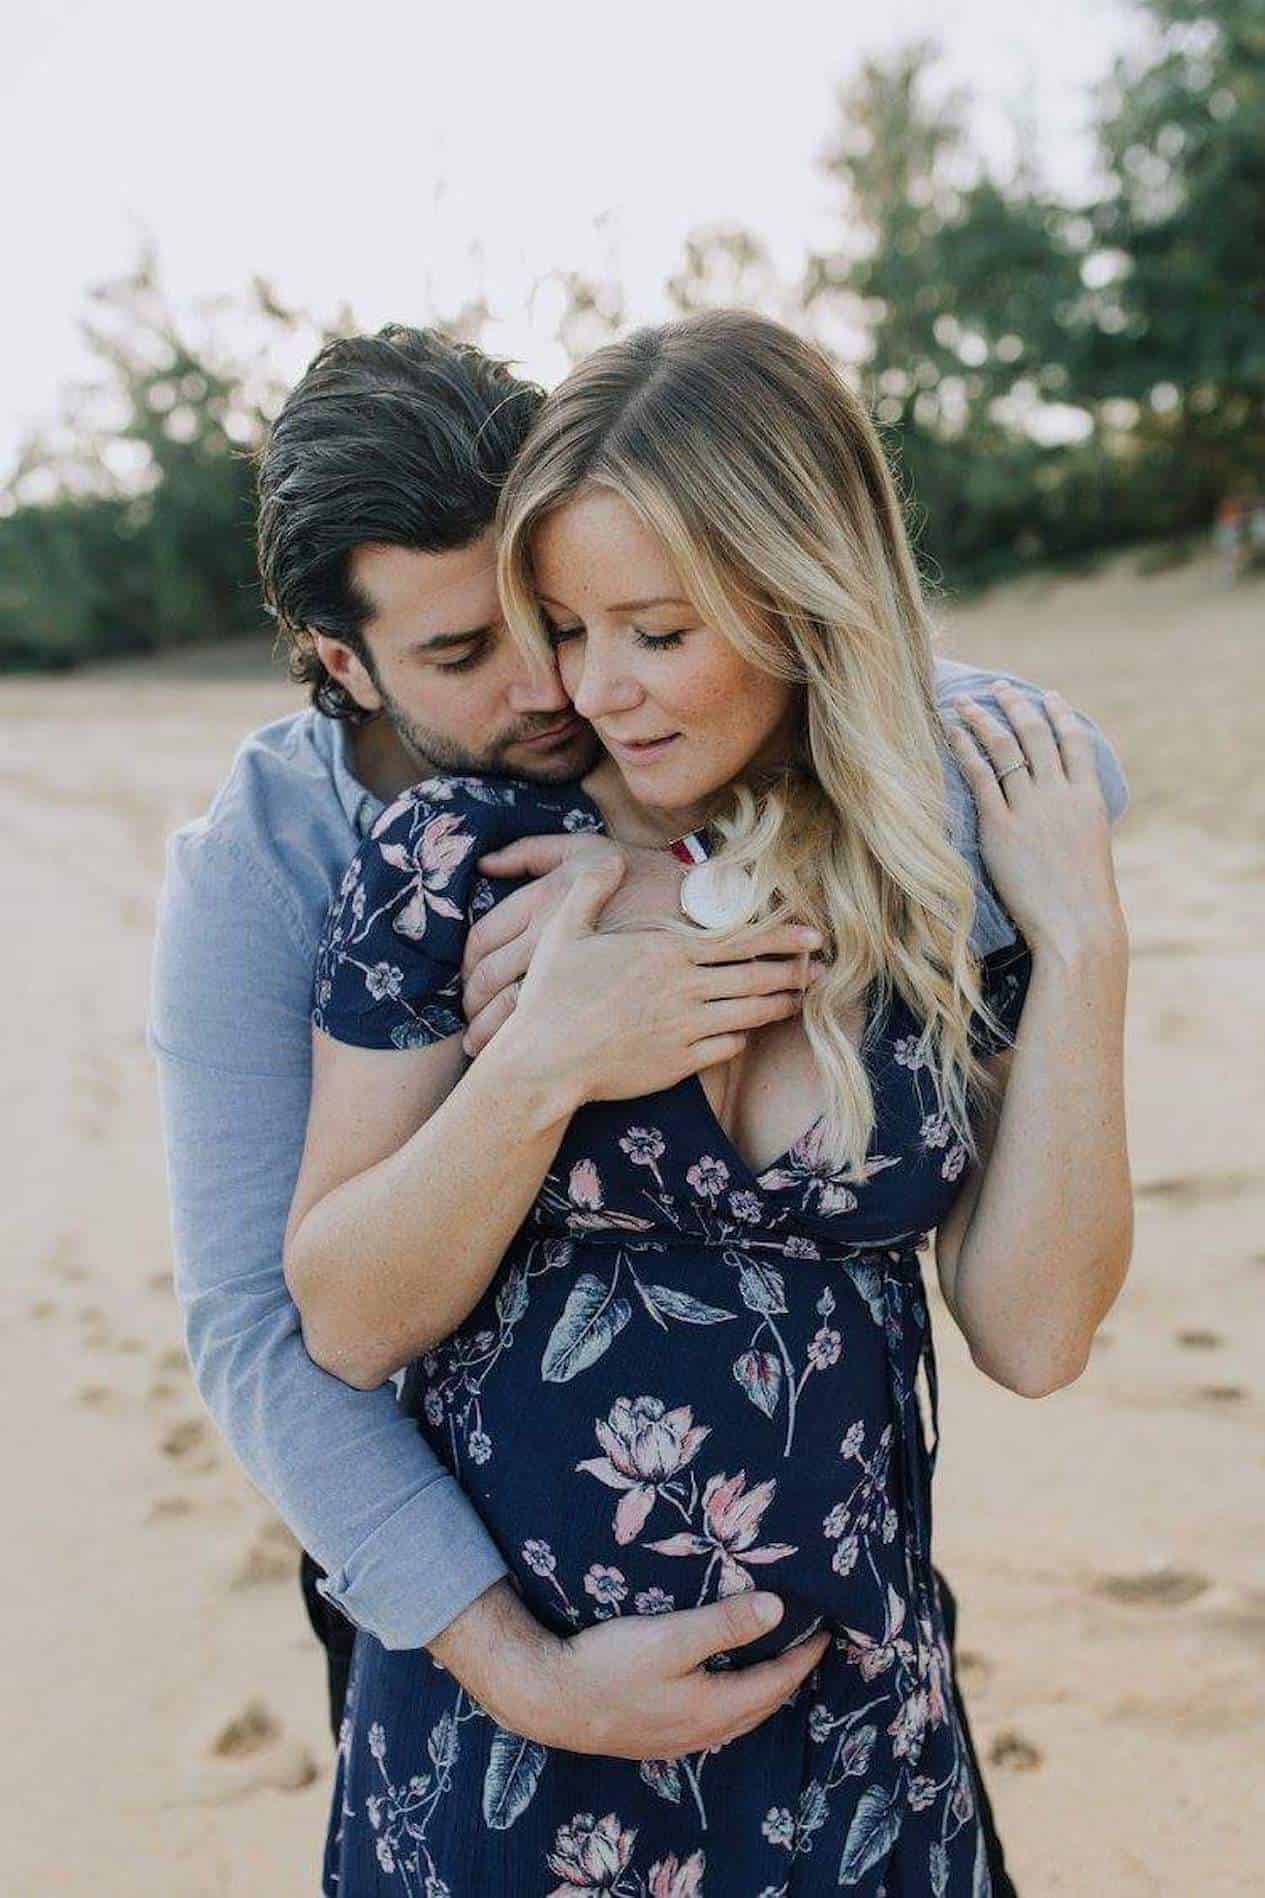 image of a man standing behind a pregnant woman on the beach giving her a hug, she is pregnant and wearing a blue floral dress